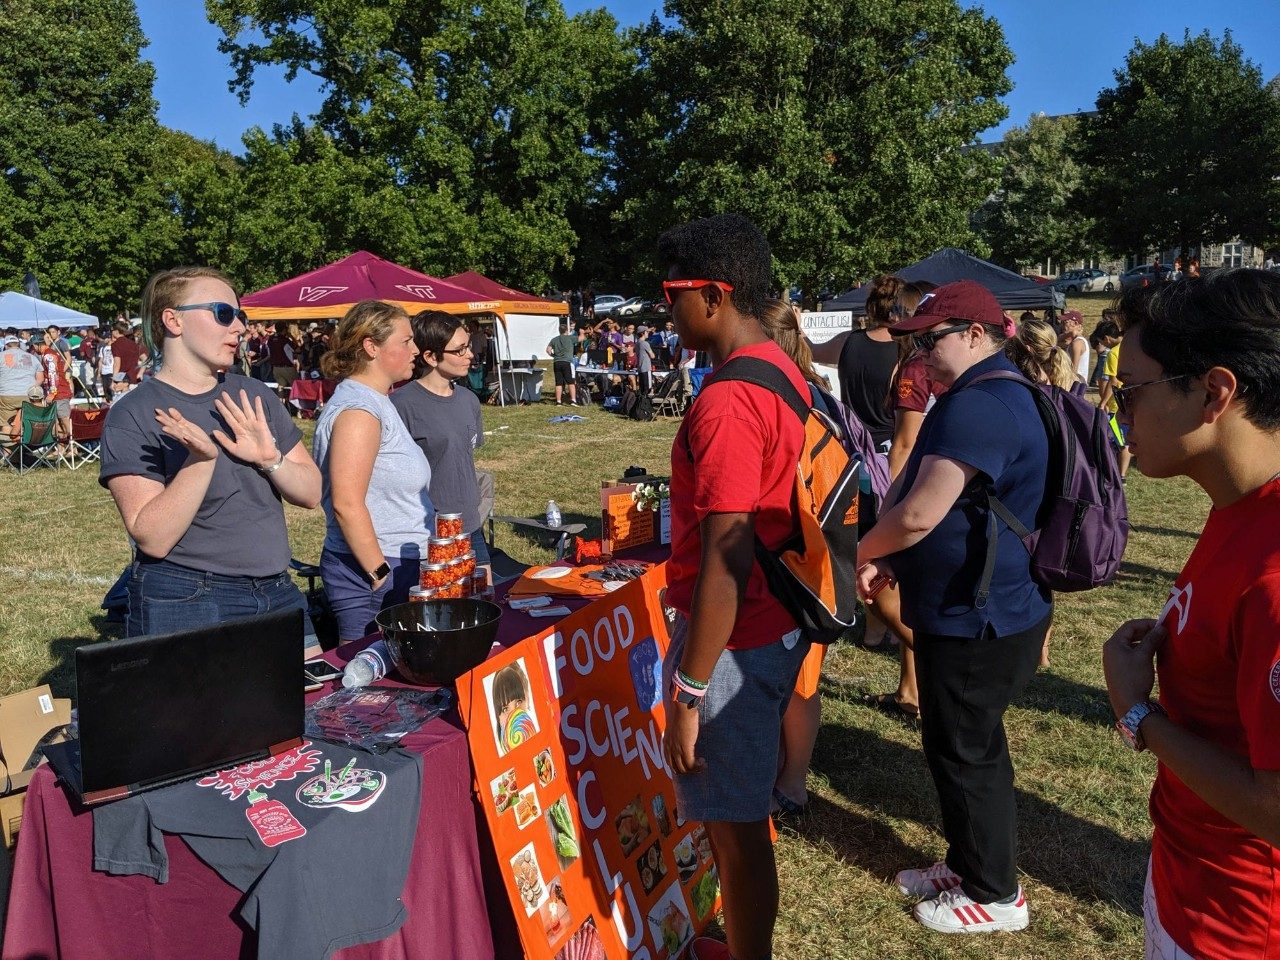 Members of the Food Science Club talk to prospective club recruits during Gobblerfest.